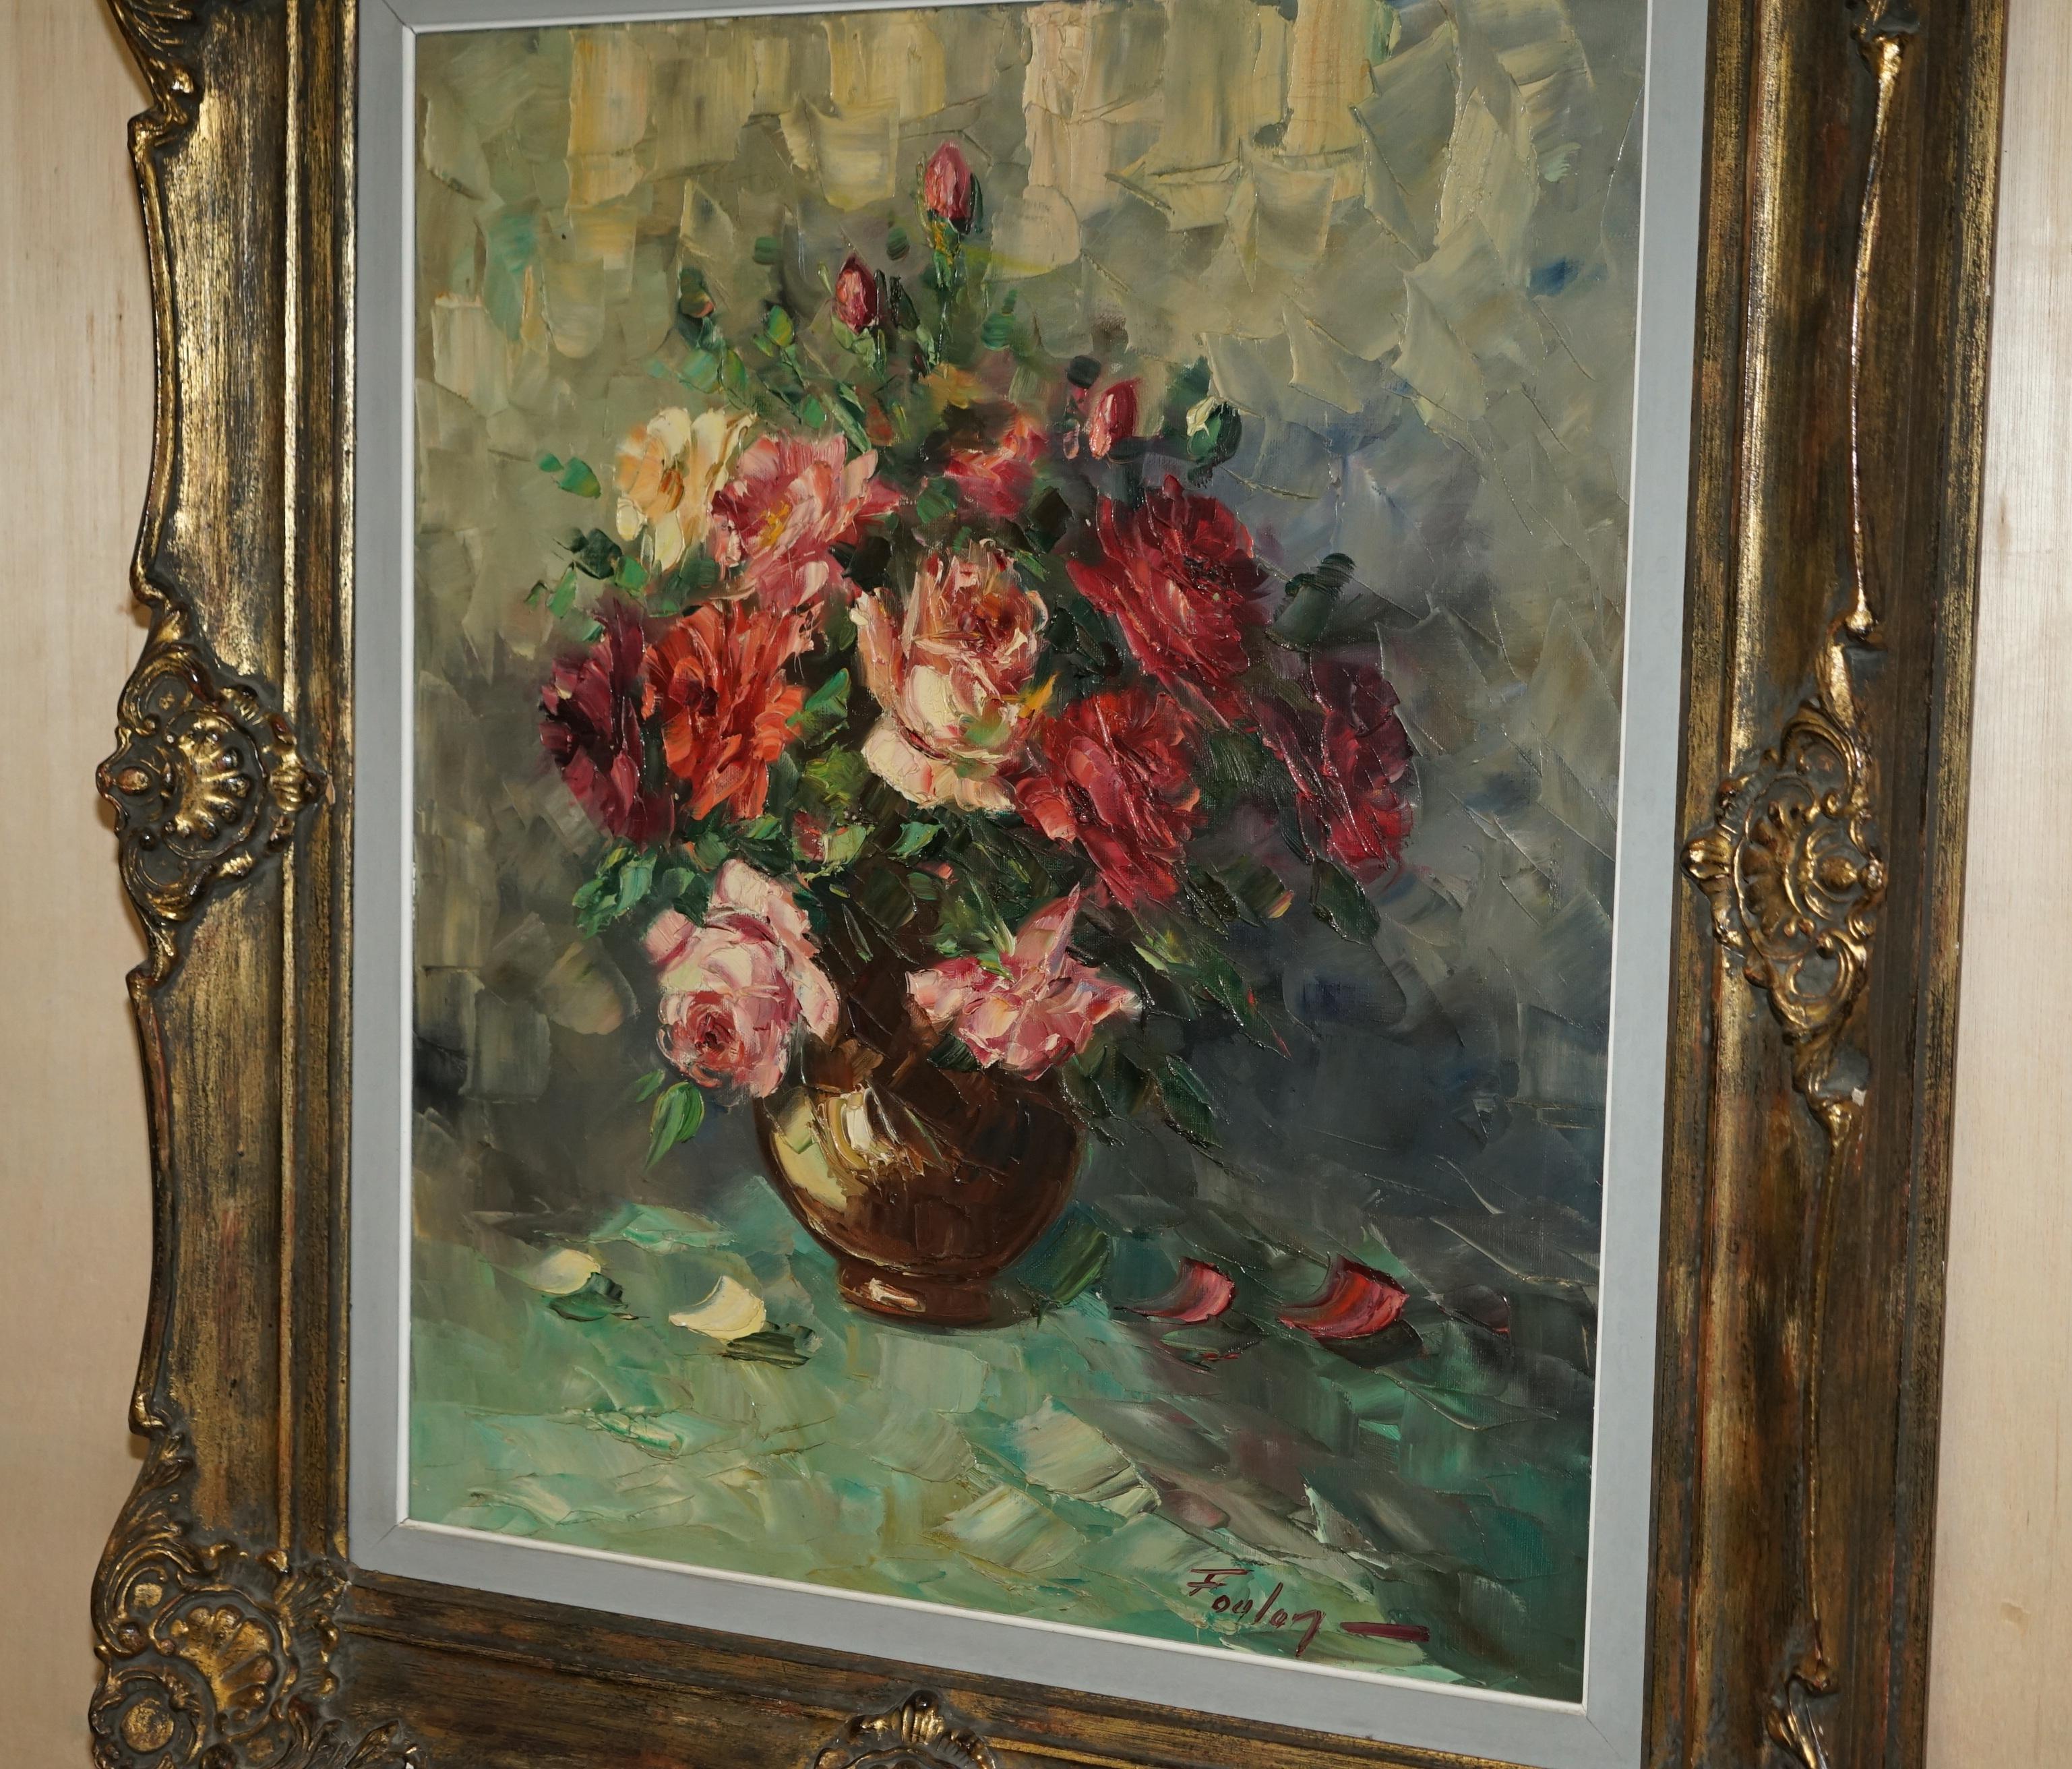 Royal House Antiques

Royal House Antiques is delighted to offer for sale this lovely original antique French oil panting of flowers which has been painted using a palette knife, signed Fouley

A very good looking and decorative oil painting, this